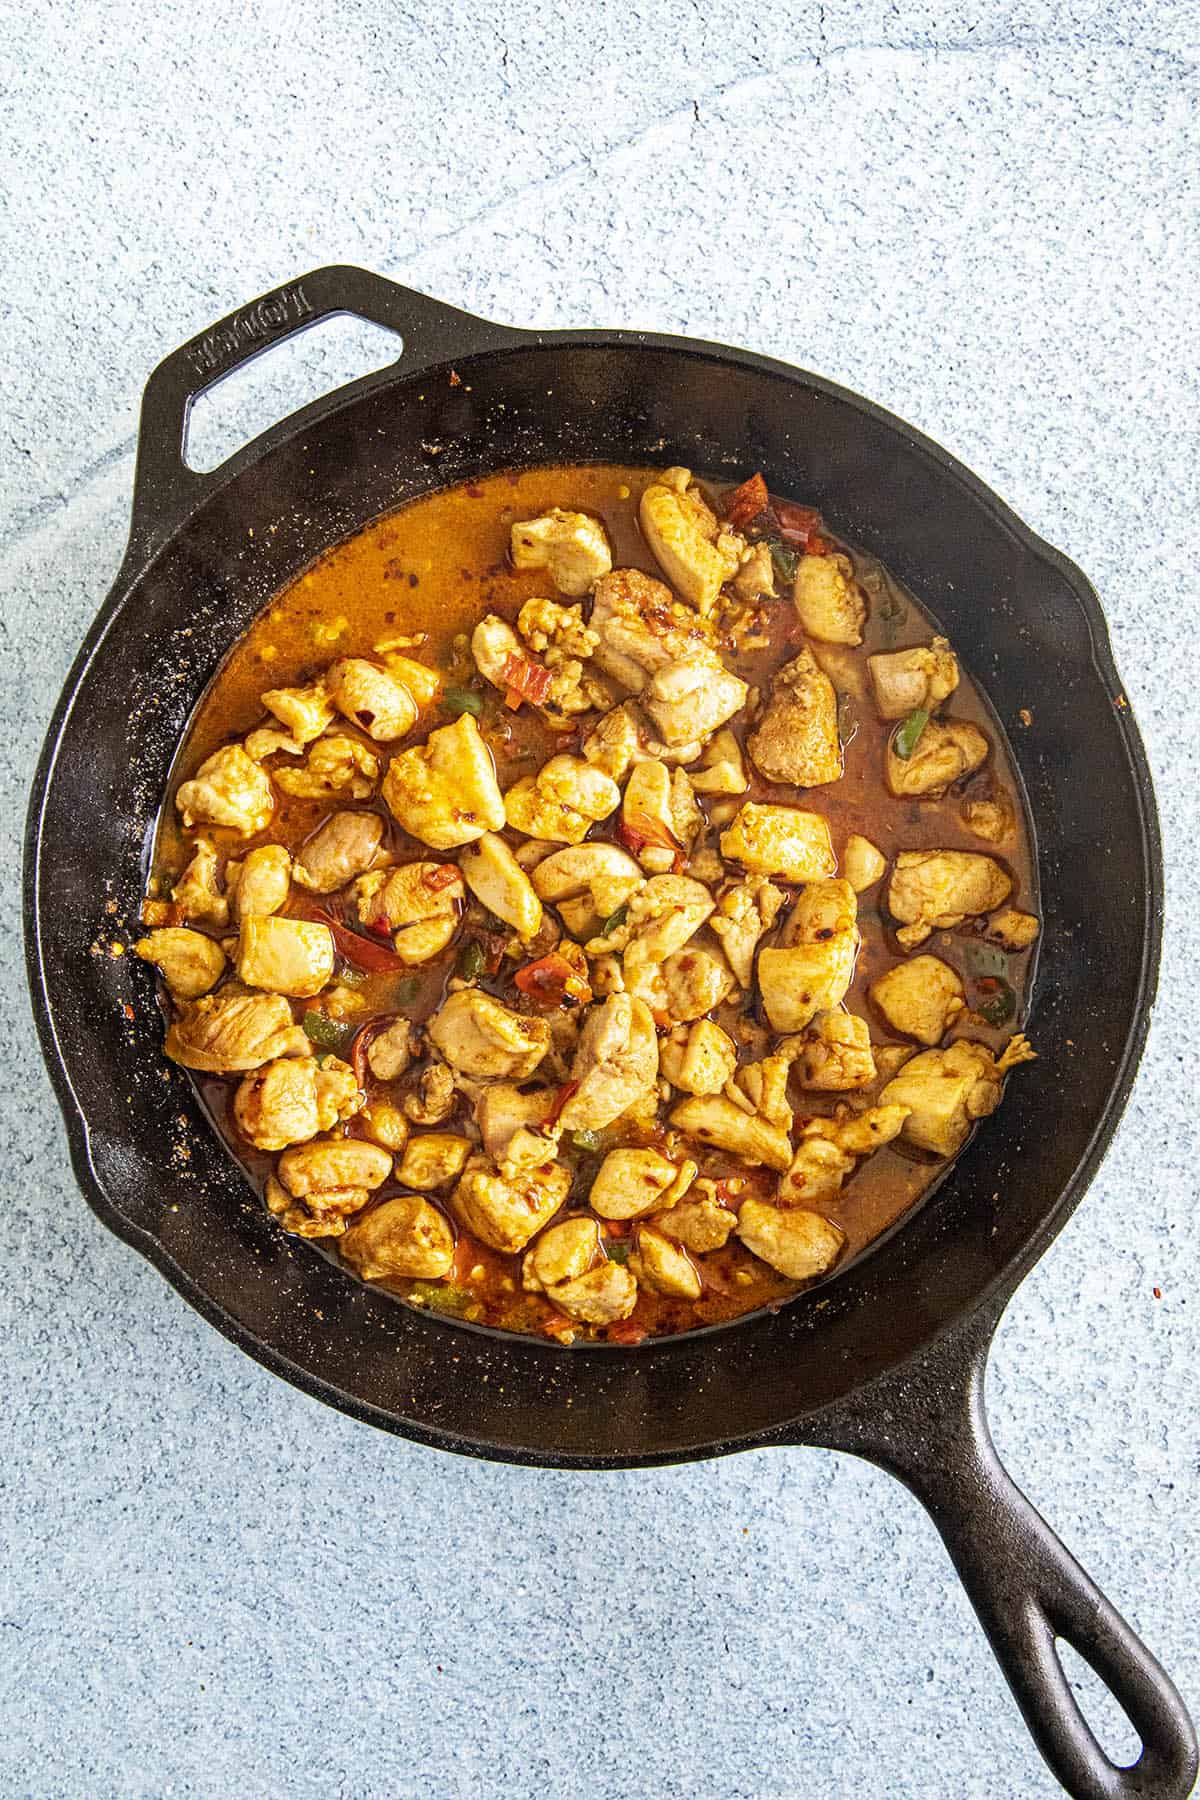 Cooking the chicken and peppers in a pan